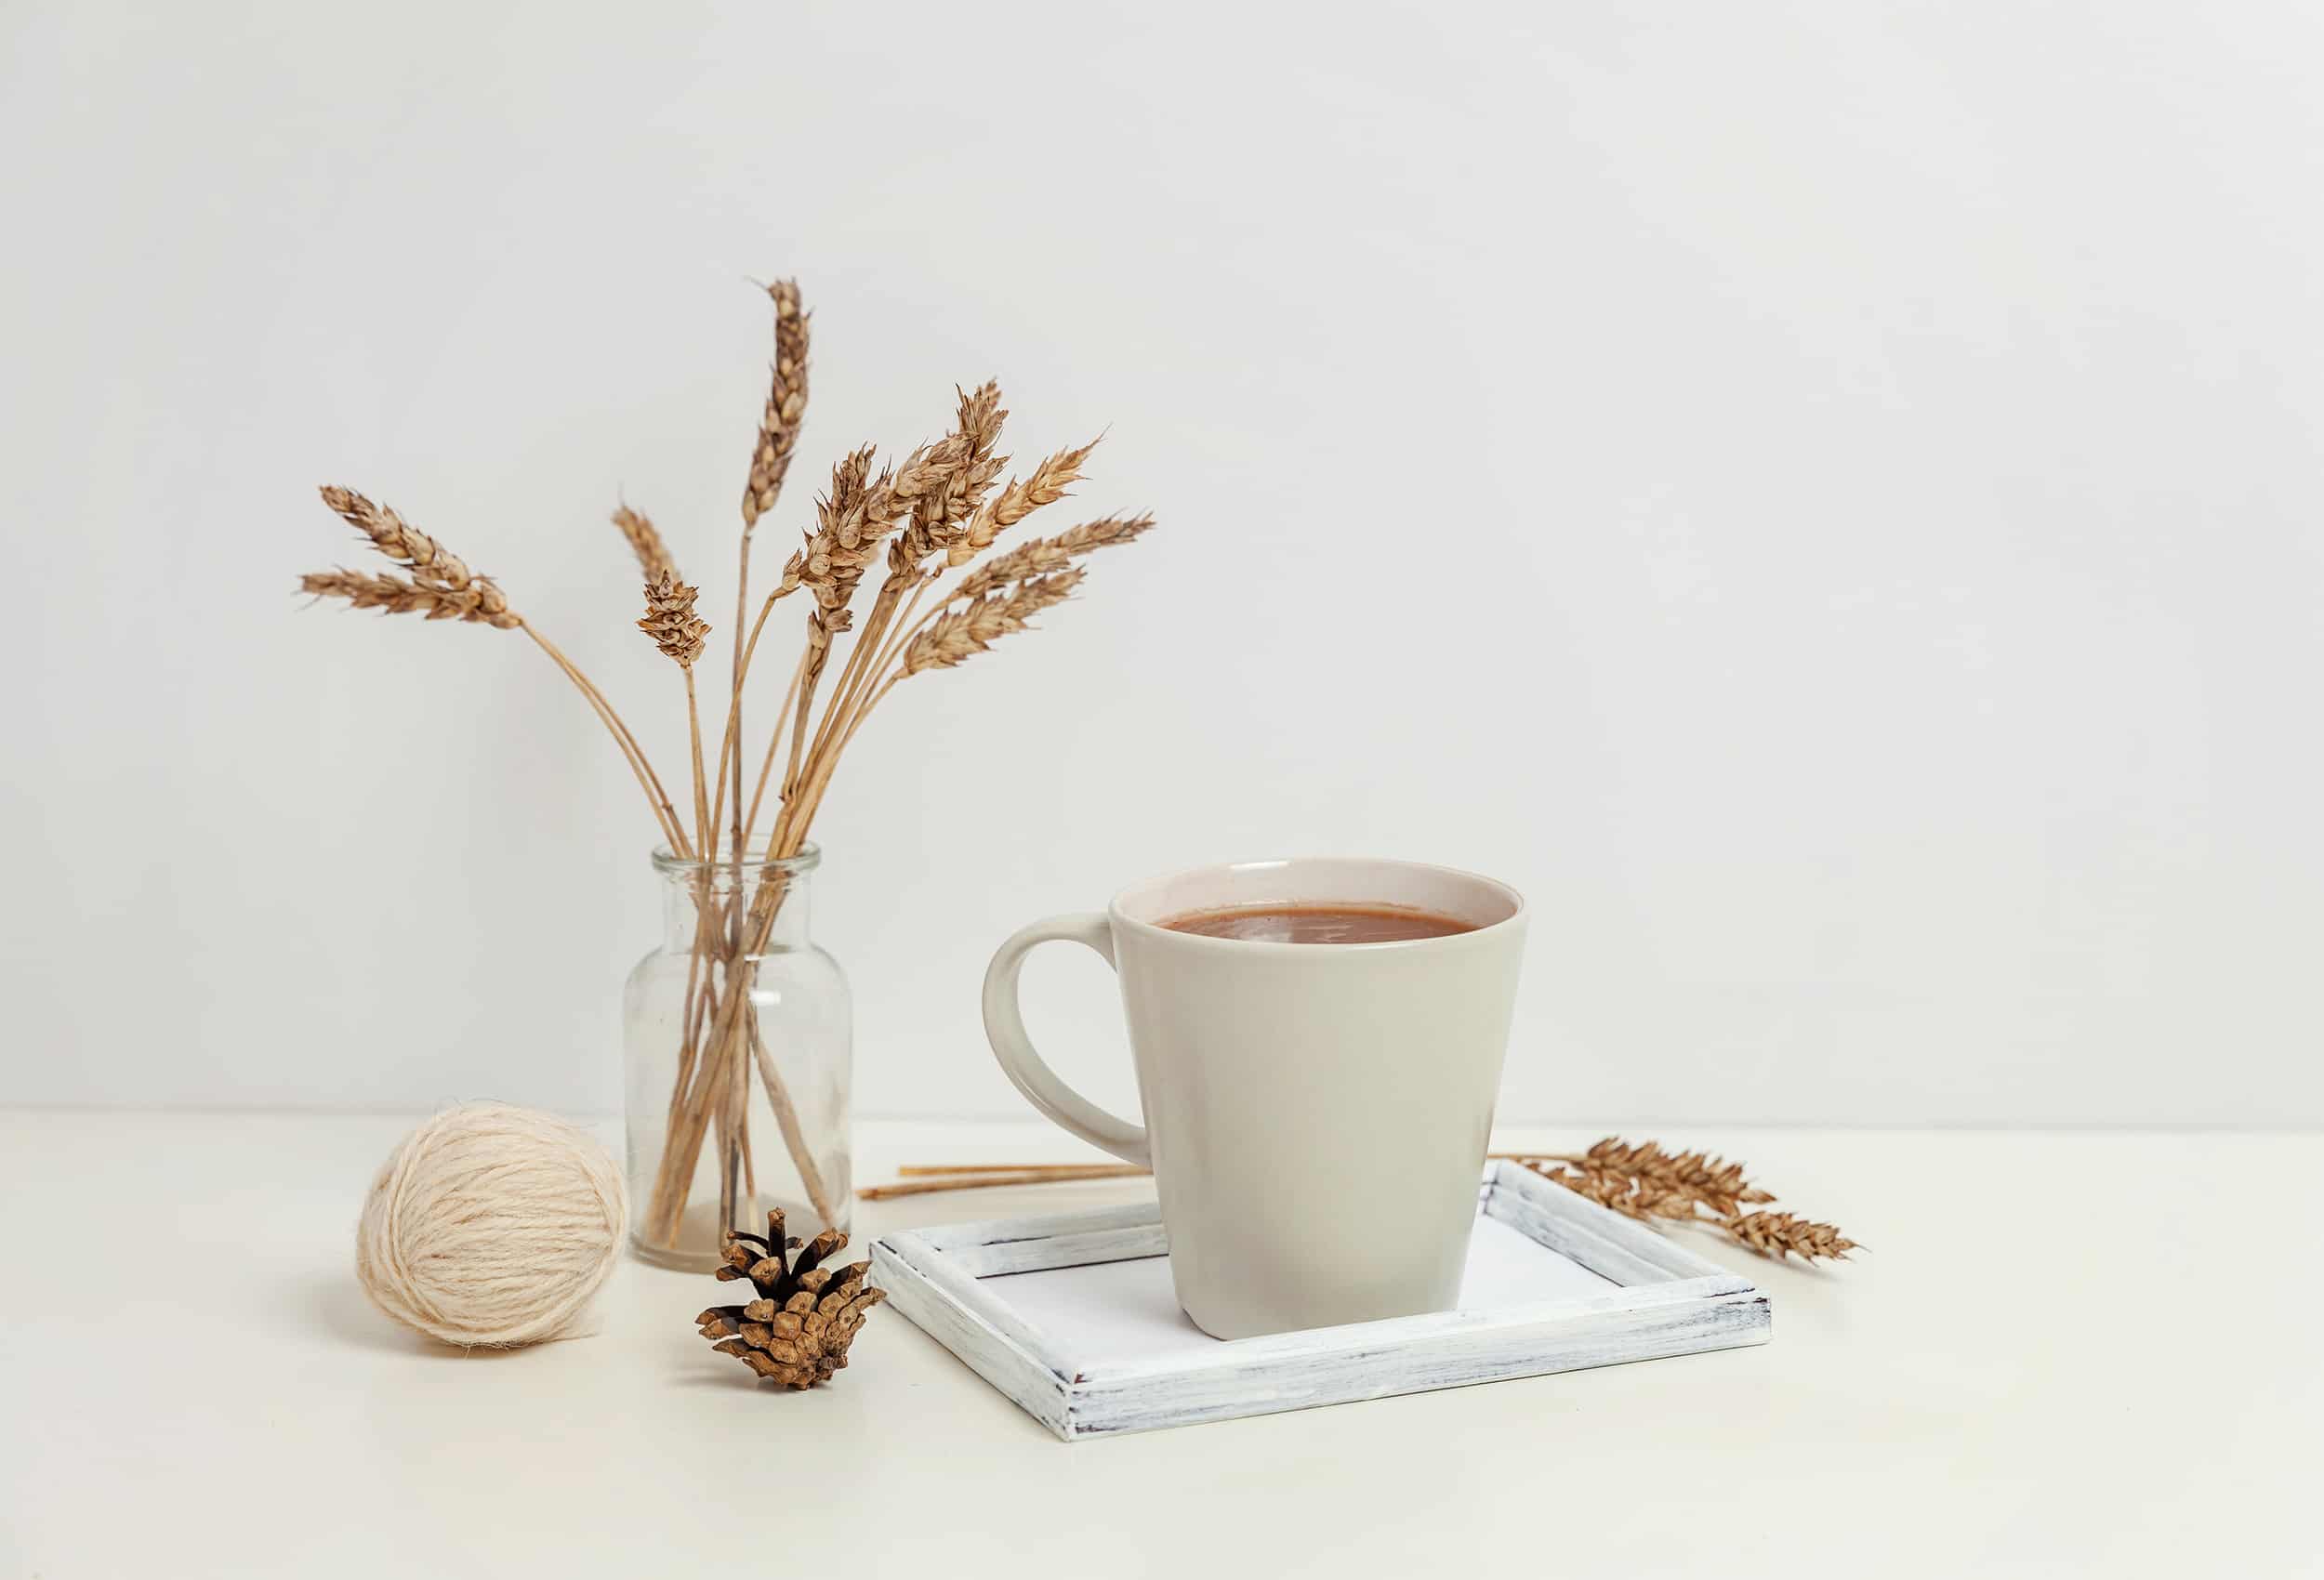 Natural-eco-home-decor-with-cup-coffee-and-candle-on-wooden-tray